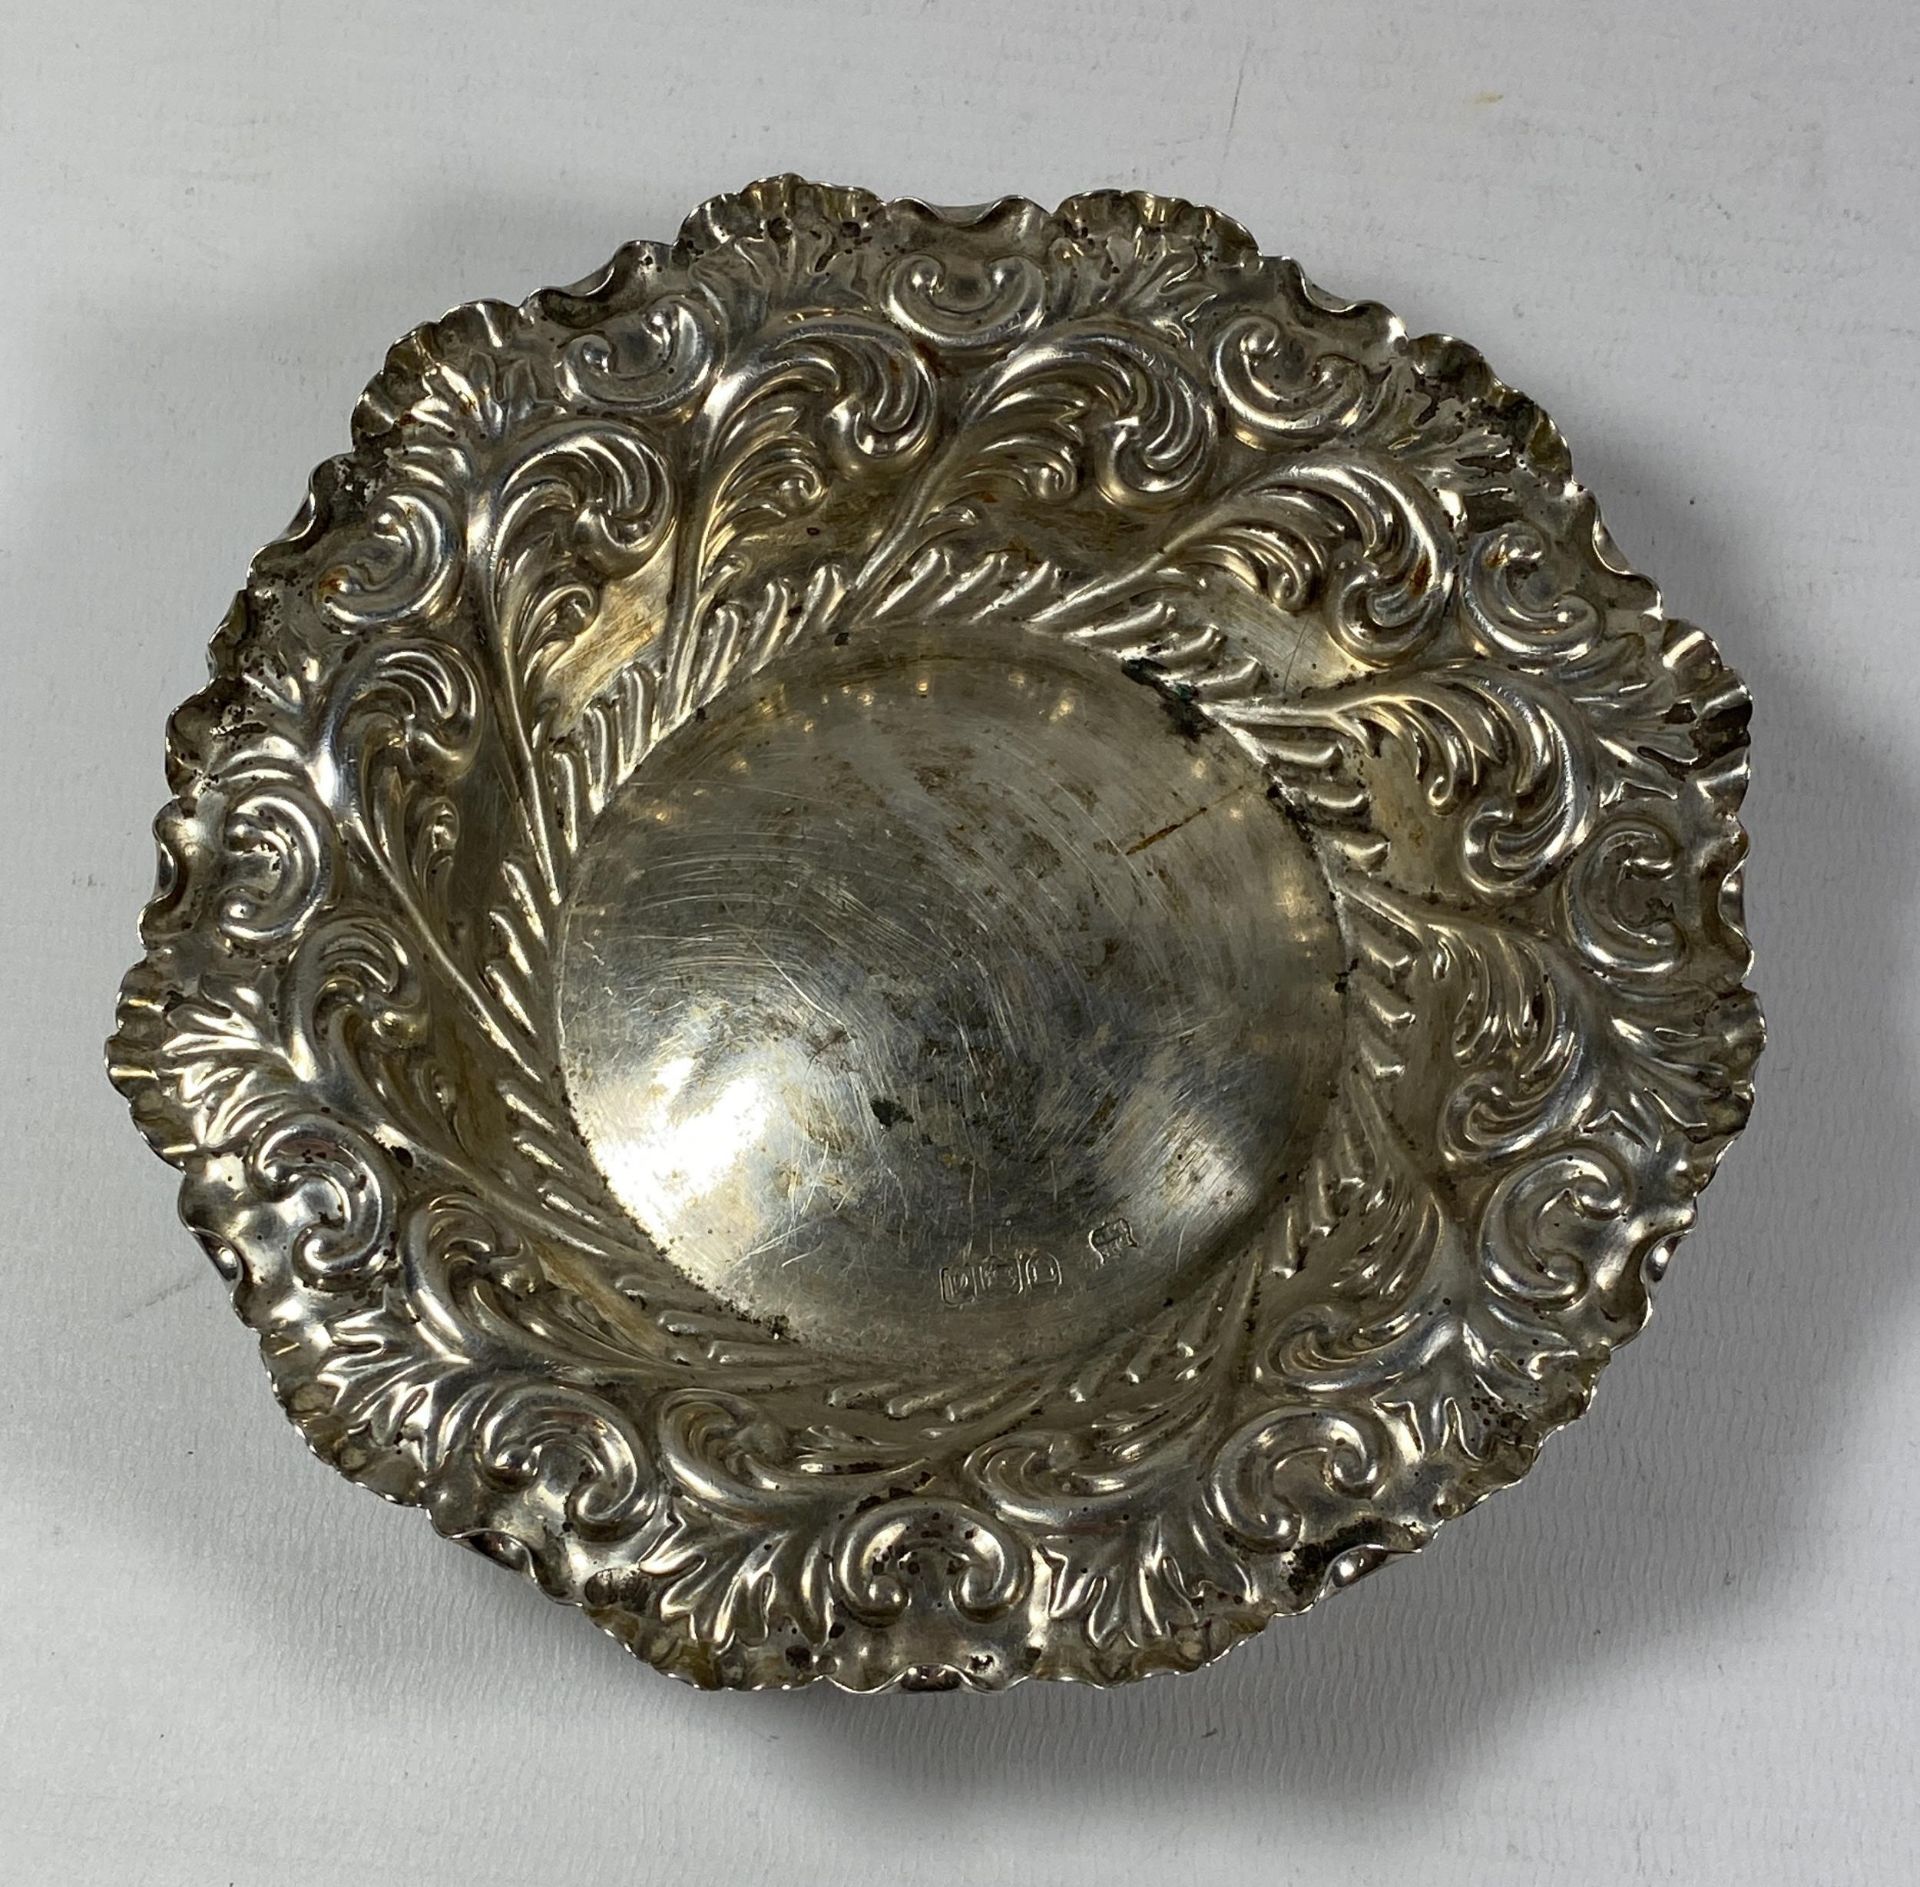 A VICTORIAN SILVER DISH, HALLMARKS FOR LONDON, 1899, MAKERS FENTON BROTHERS LTD, WEIGHT 85G